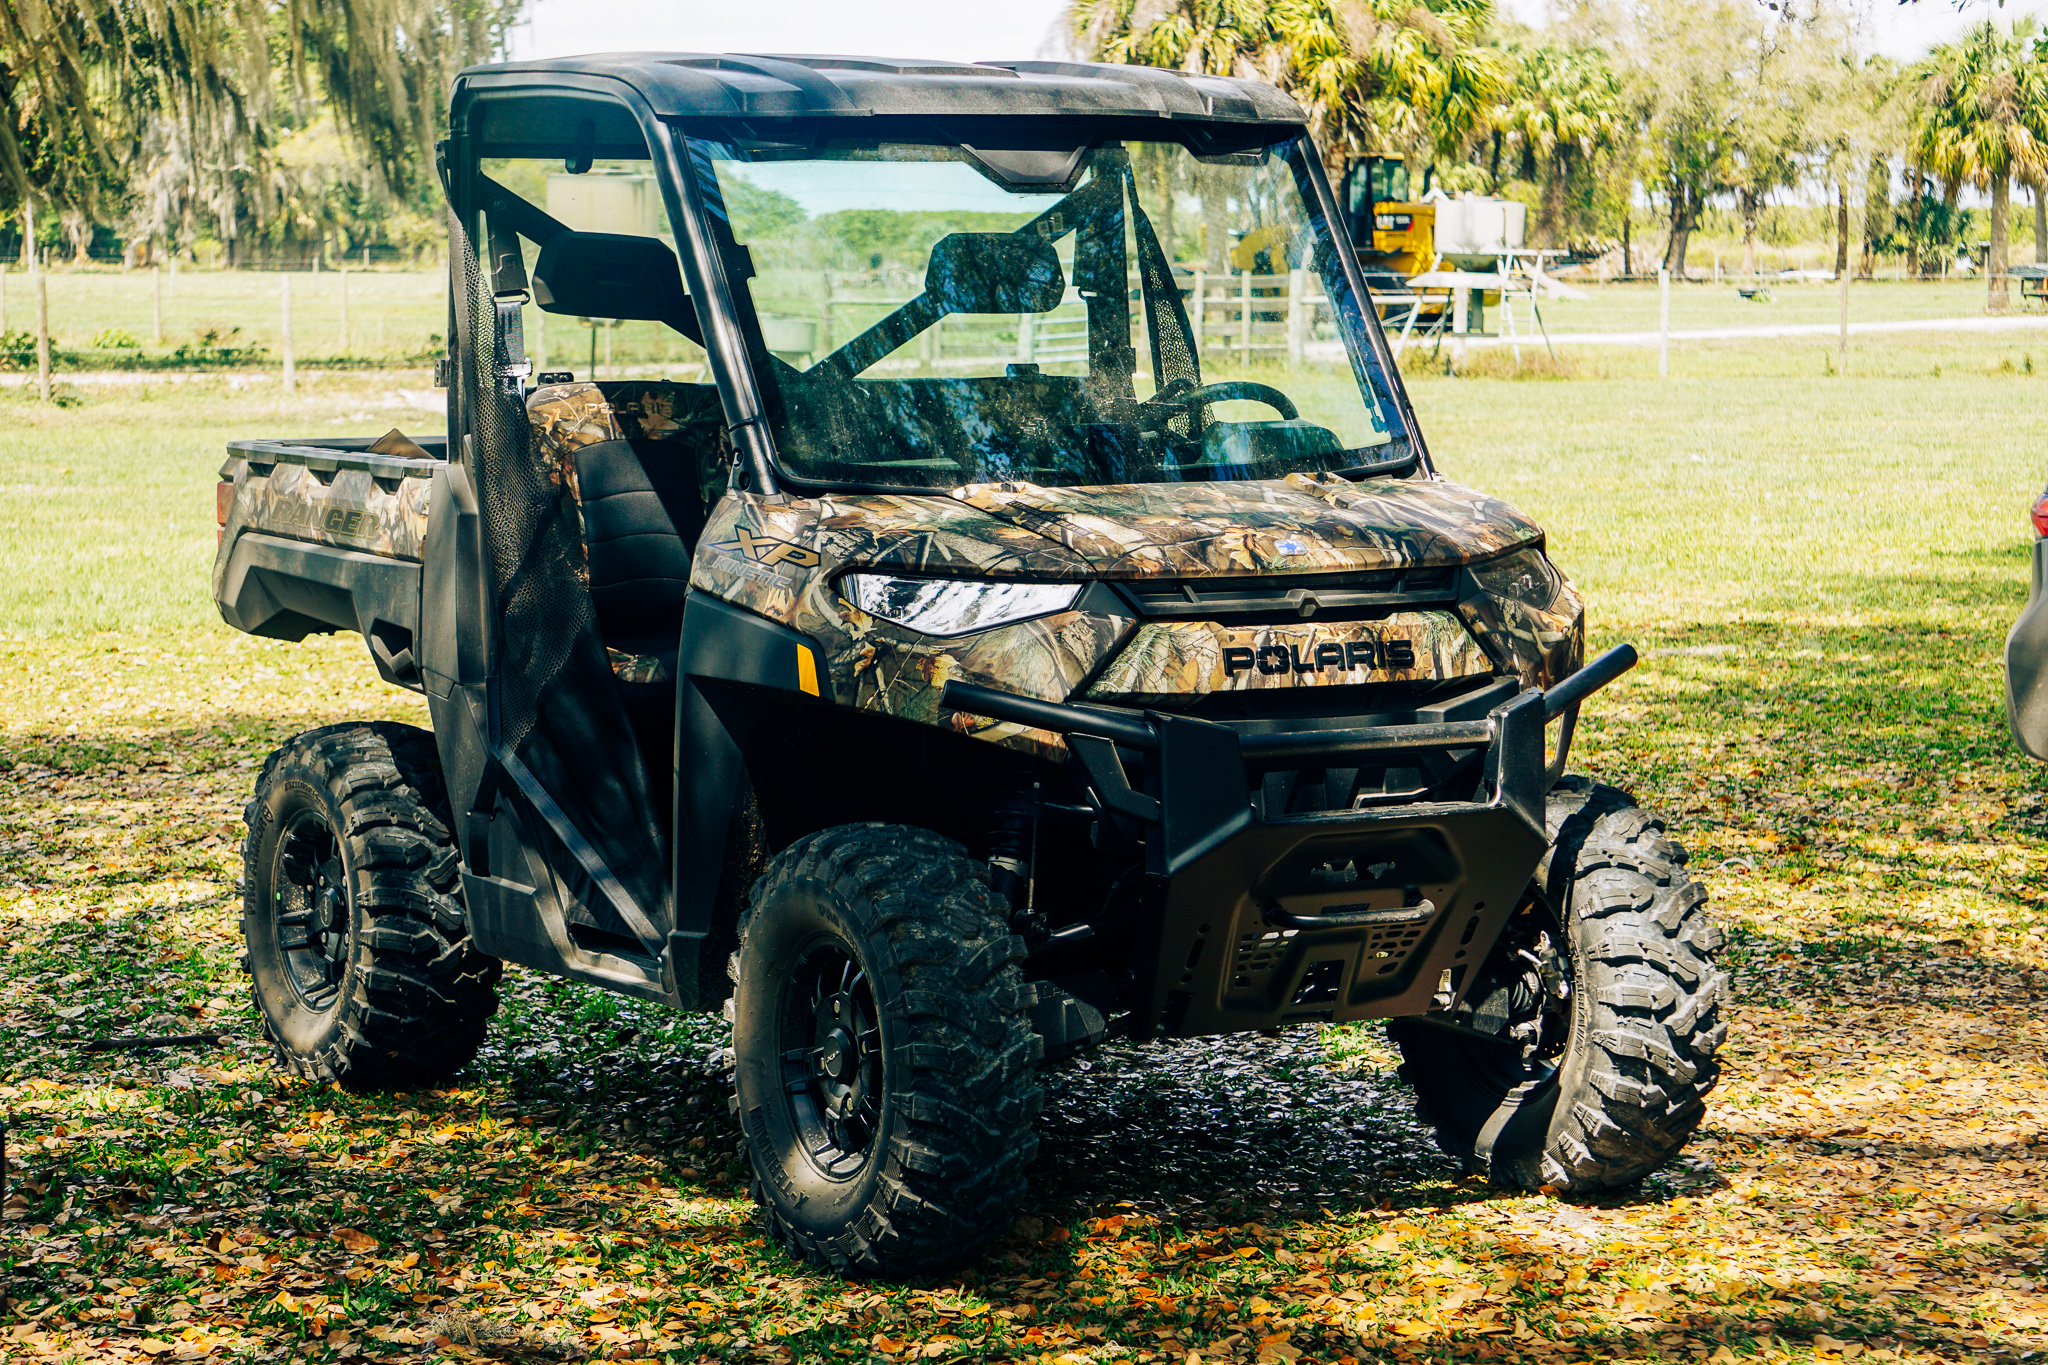 The Polaris Ranger XP Kinetic Is the Electric UTV Deer Hunters Have Been Waiting For